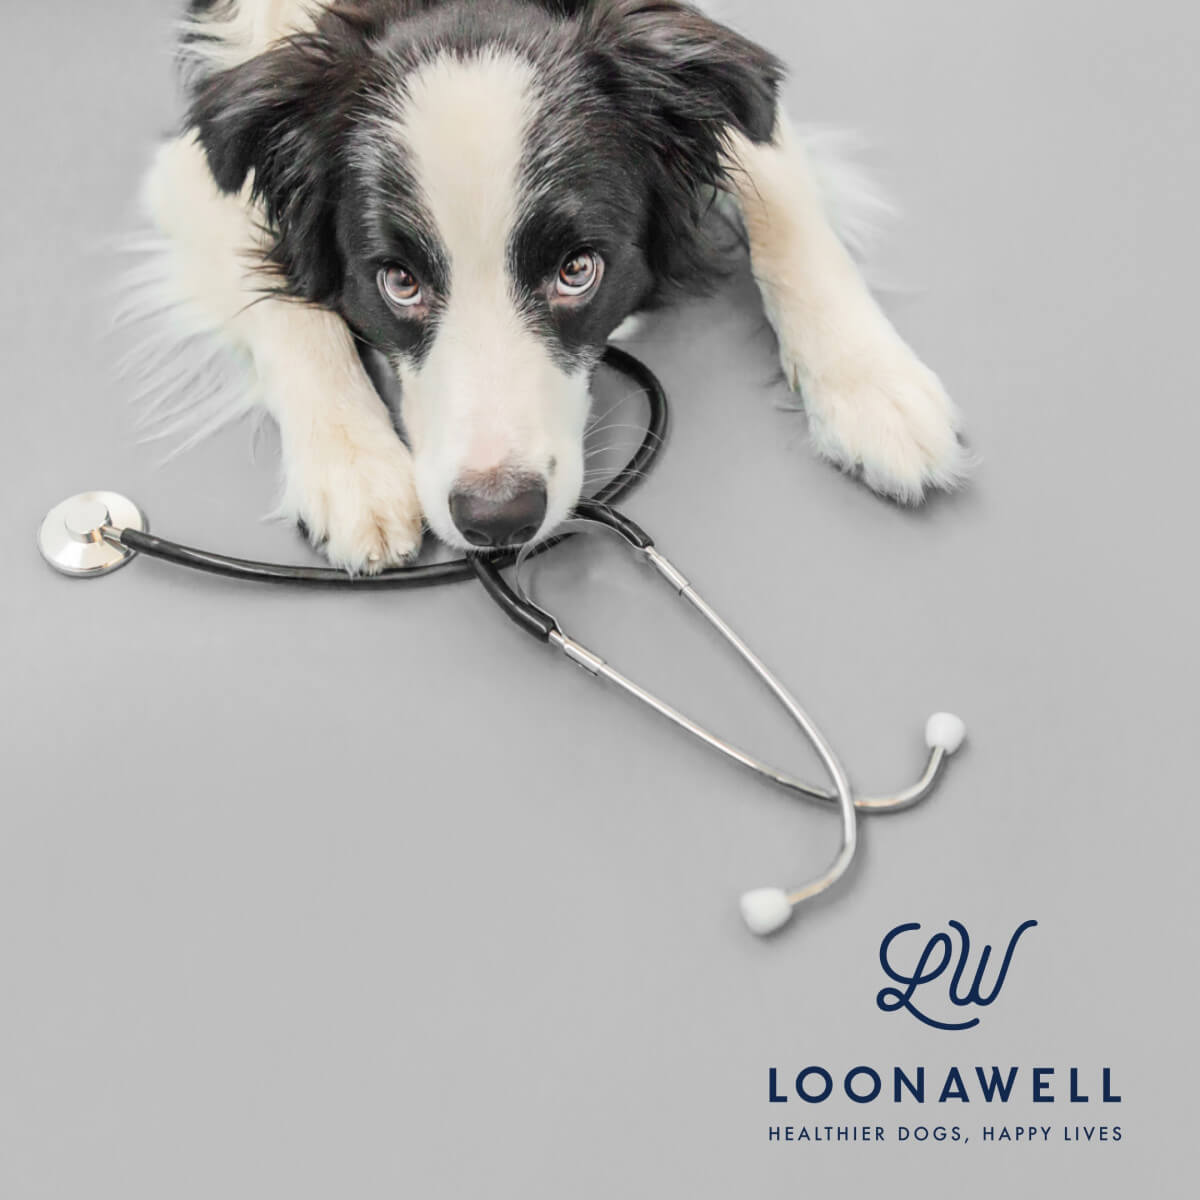 LOONAWELL Recommended By The Vet And Featured In Gentlemag